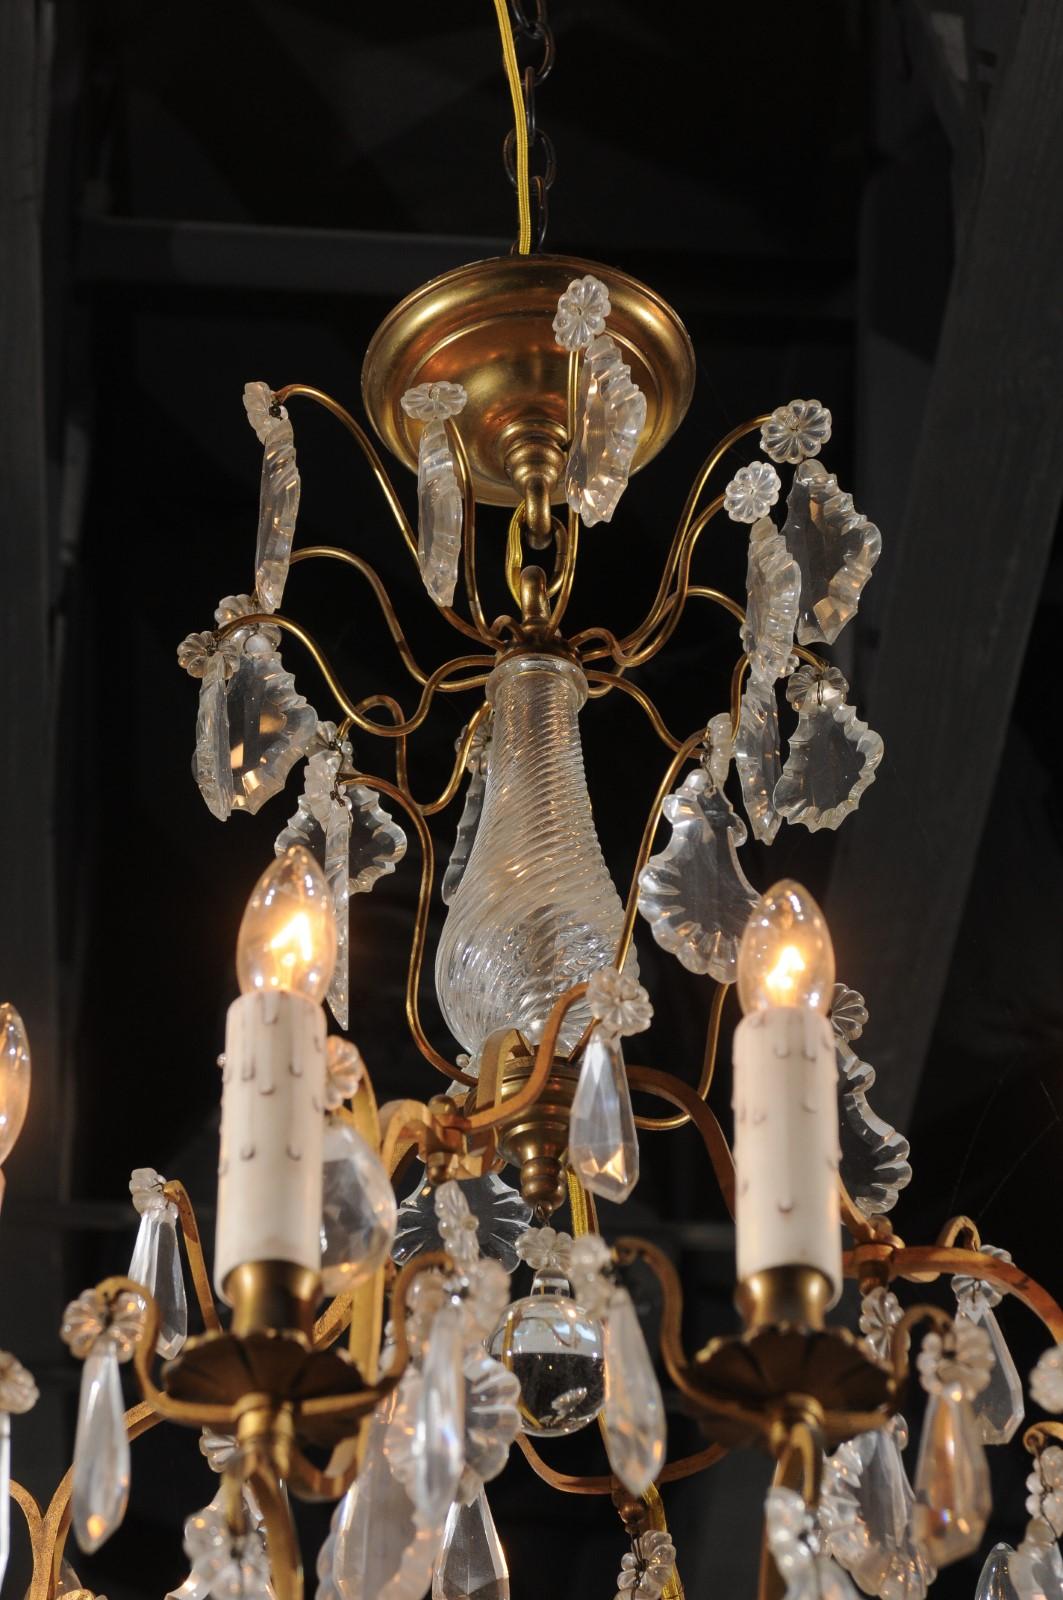 A French 12-light crystal chandelier from the late 19th century, with brass armature and pendeloques. Born in France during the last quarter of the 19th century, this exquisite 12-light chandelier features a central crystal baluster motif with